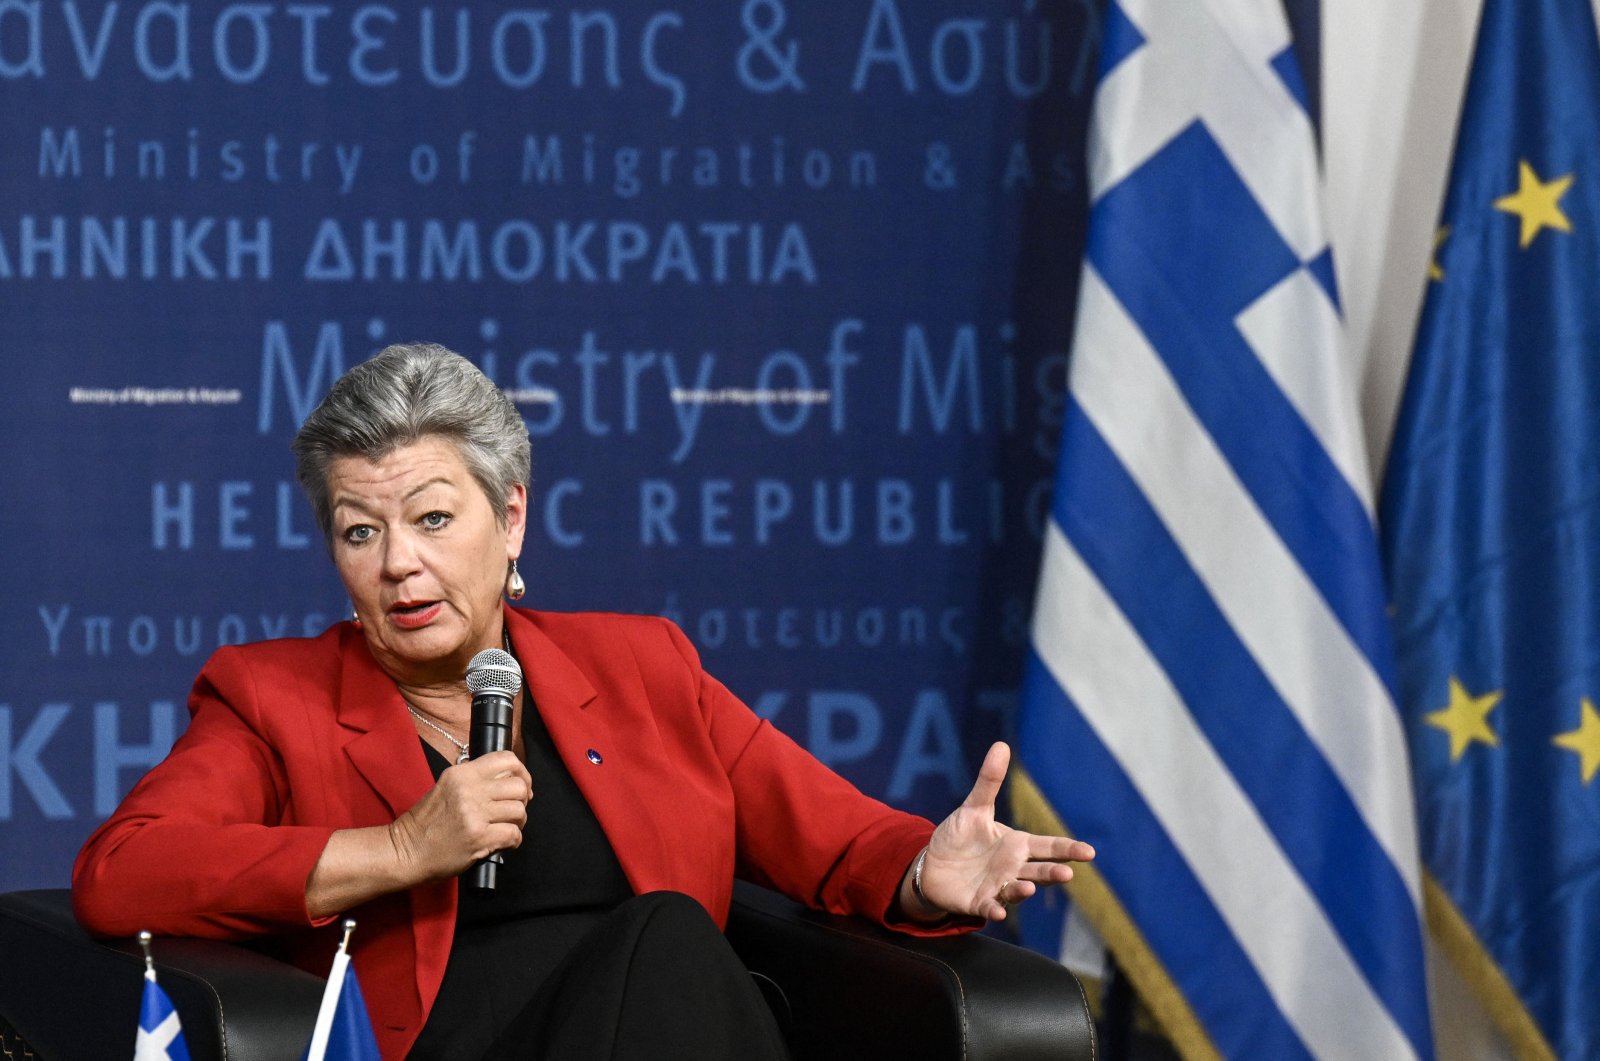 European Commissioner for Home Affairs Ylva Johansson talks during a panel discussing the details of a preliminary EU agreement on migration management at the Ministry of Migration and Asylum in Athens, Greece, Jan. 8, 2024. (AFP Photo)